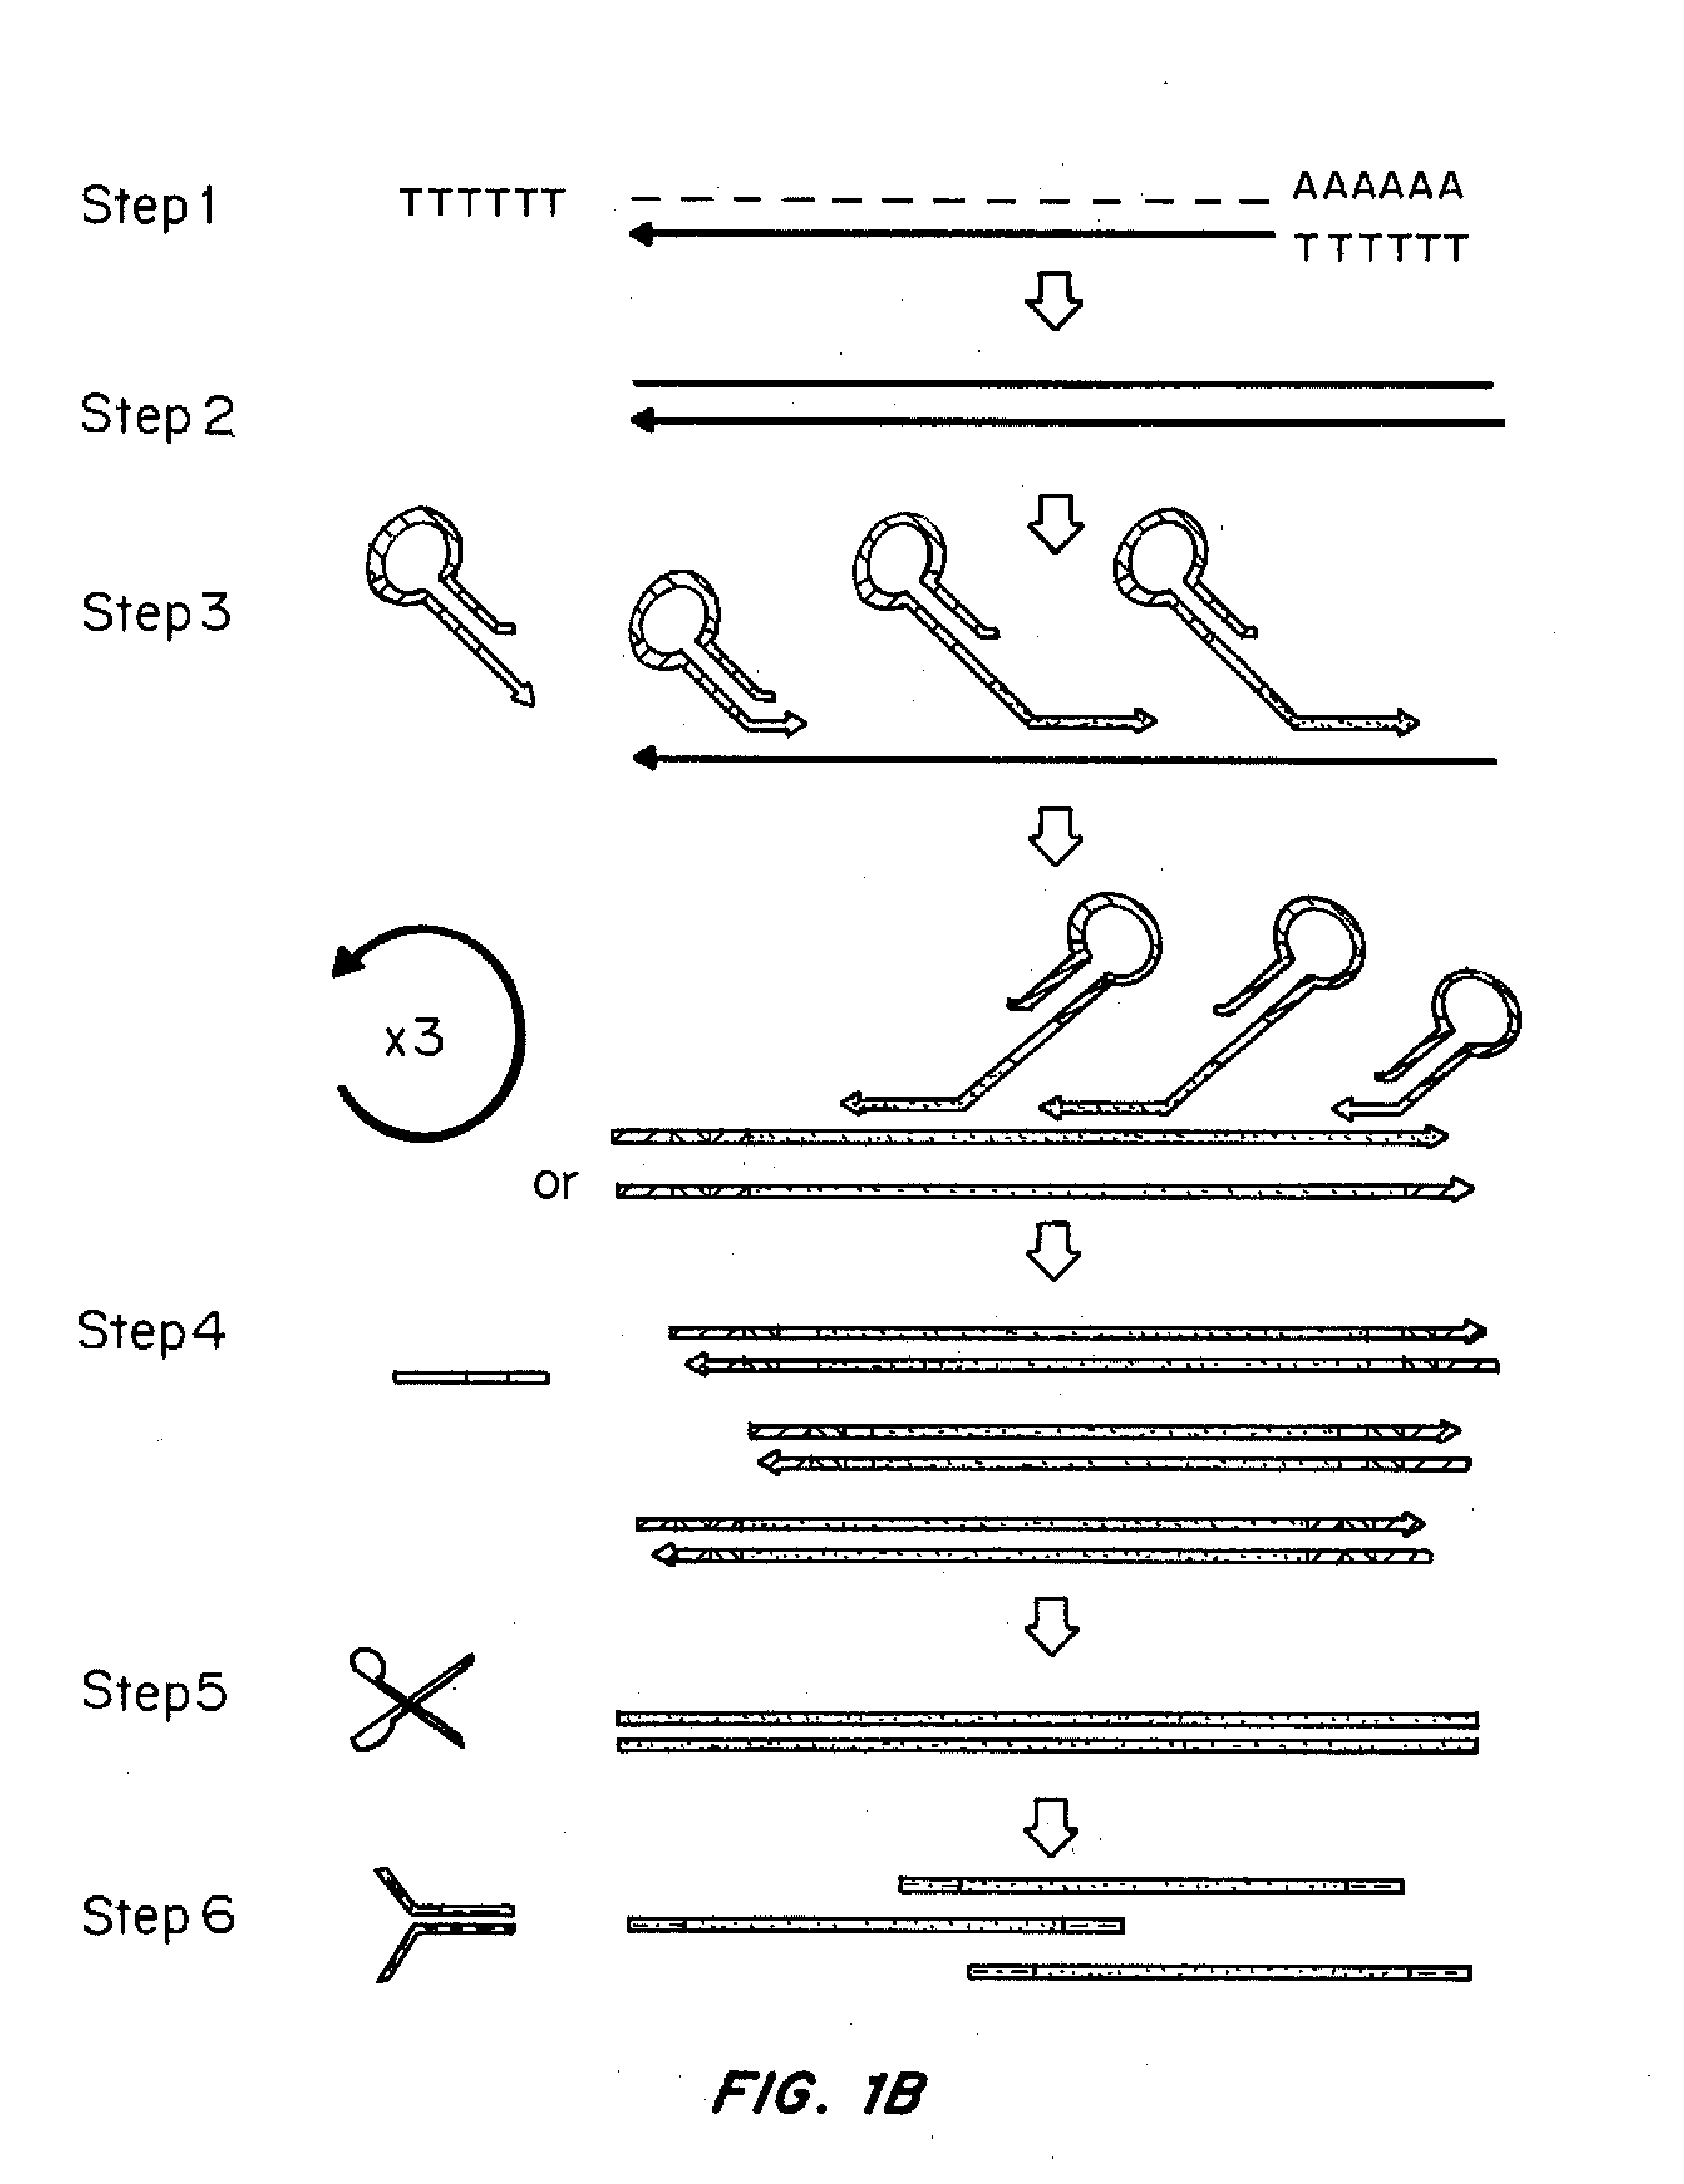 Methods For Preparing cDNA From Low Quantities of Cells